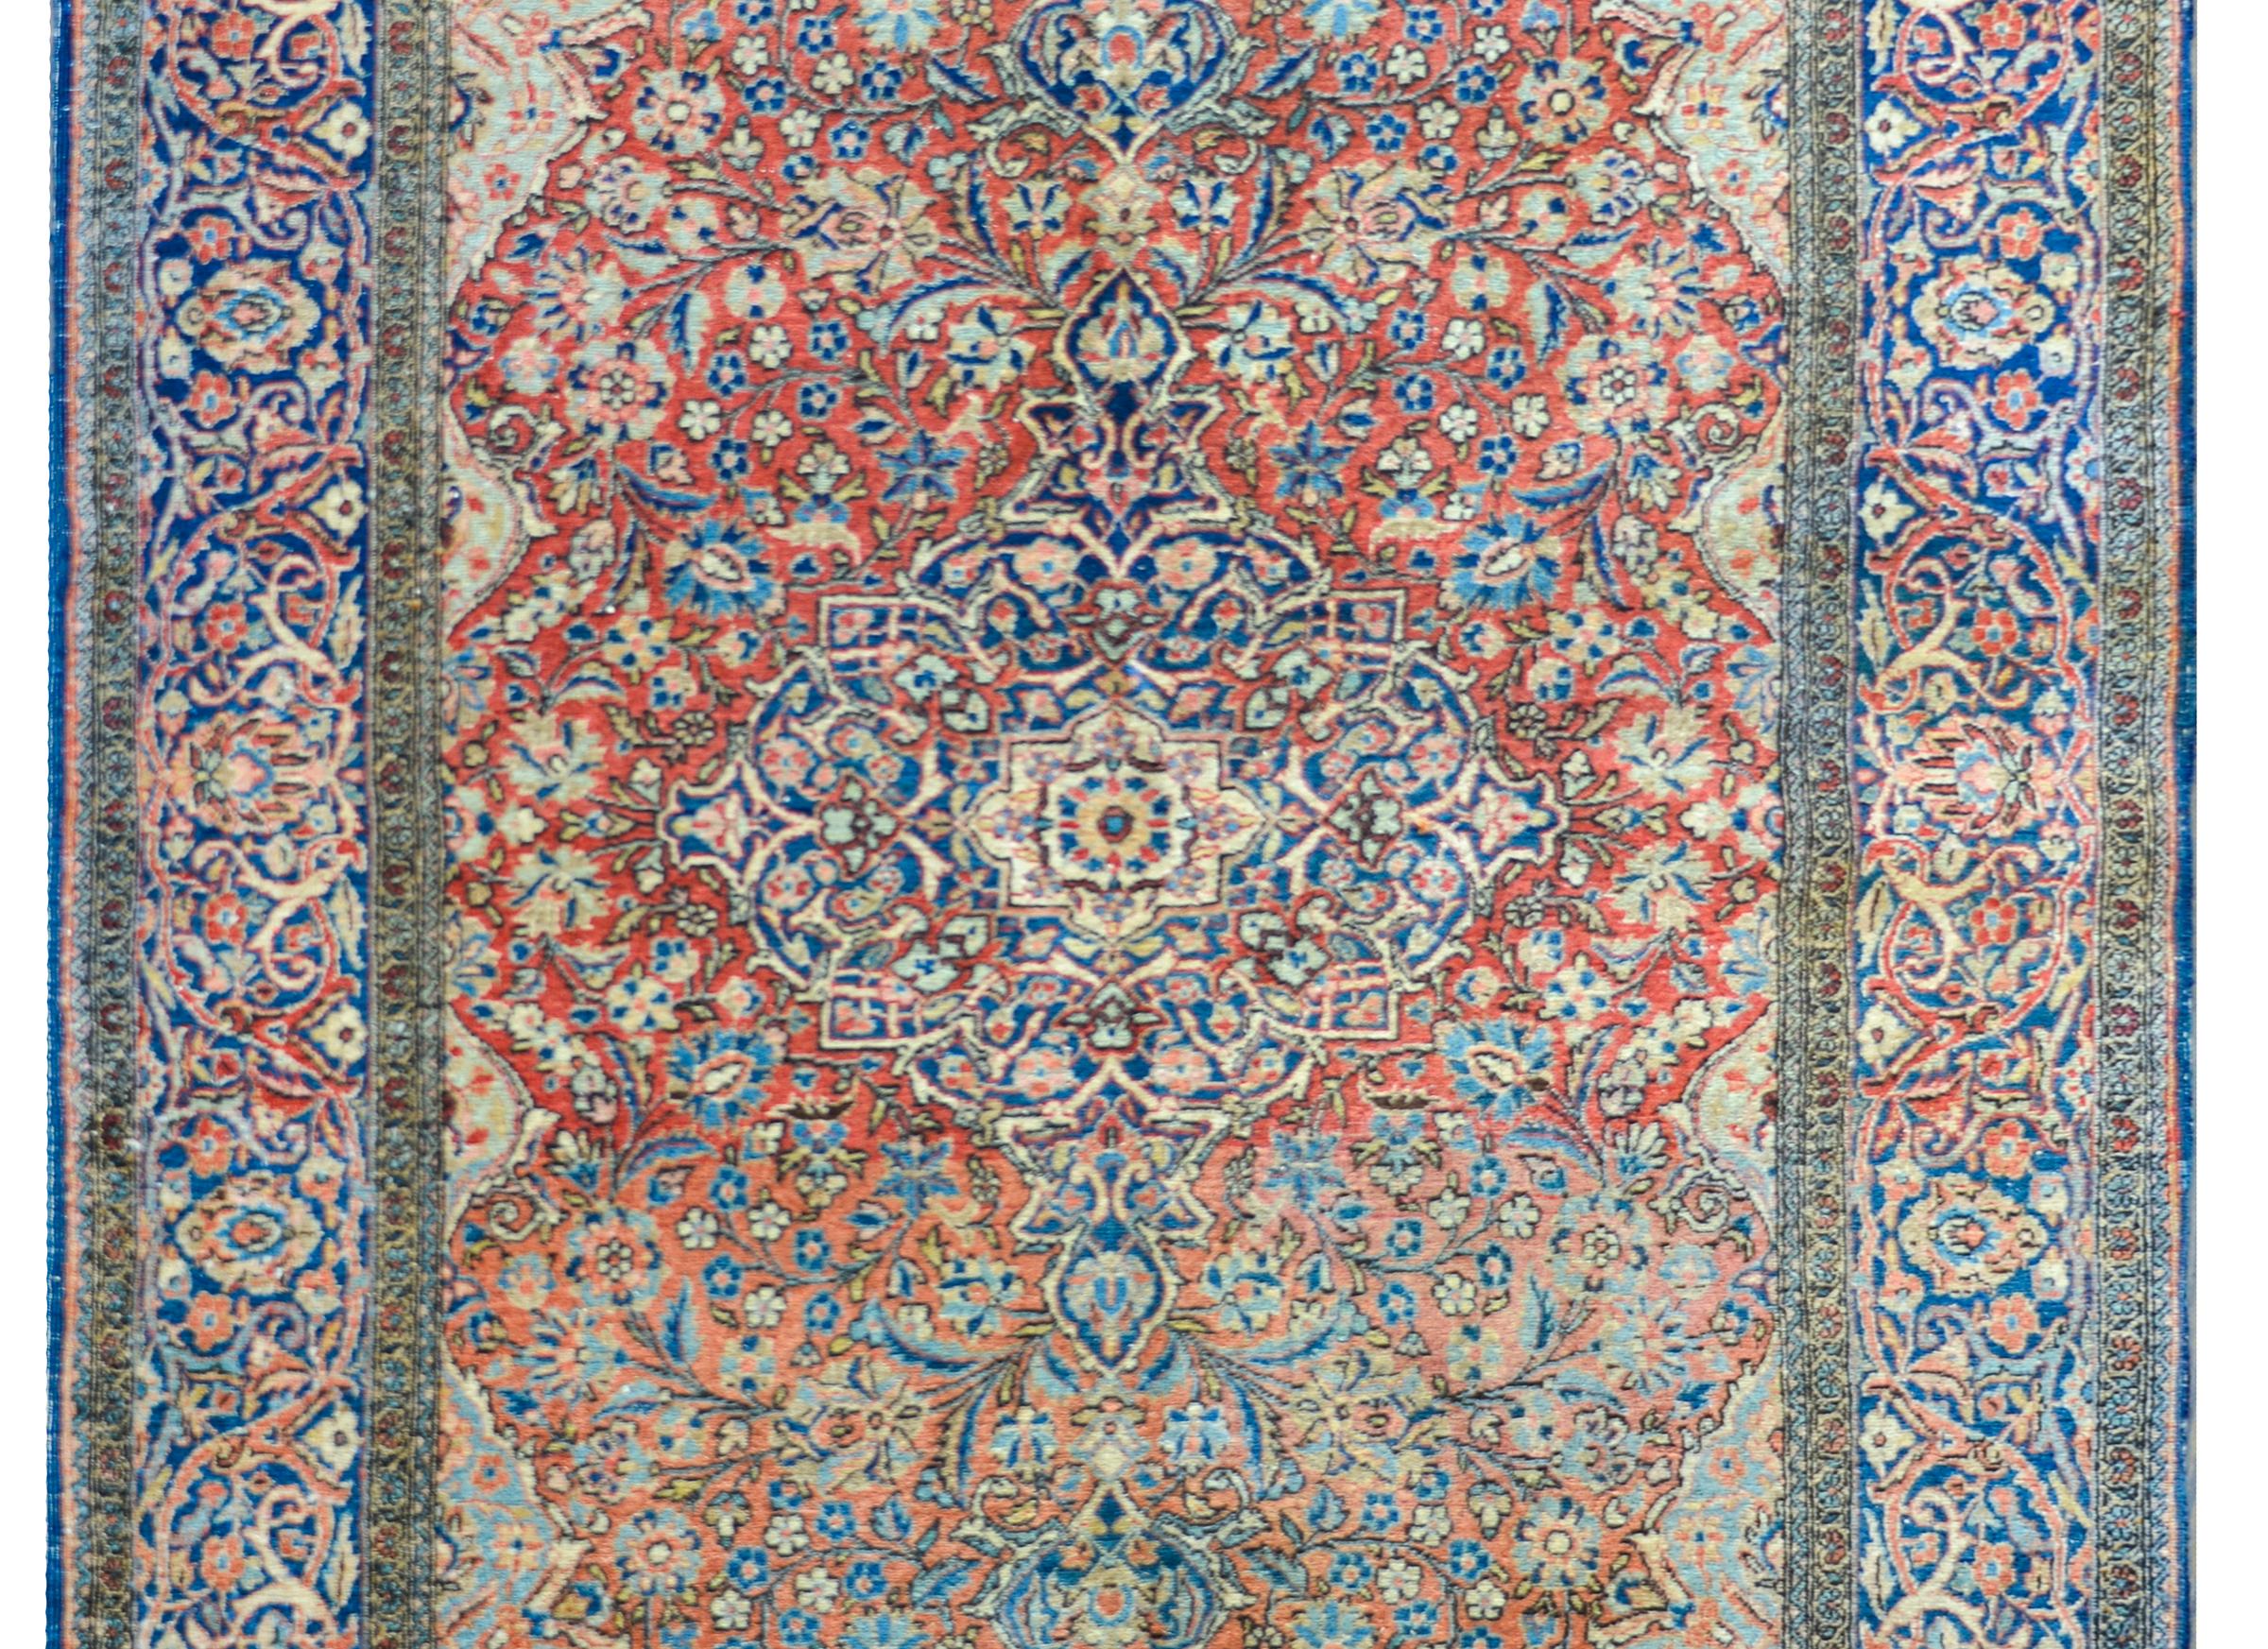 An outstanding early 20th century Persian Kashan rug with the most elaborate central medallion and floral field woven in beautiful indigos, pinks, golds, and creams set against a fantastic abrash red background. The border is equally beautiful with